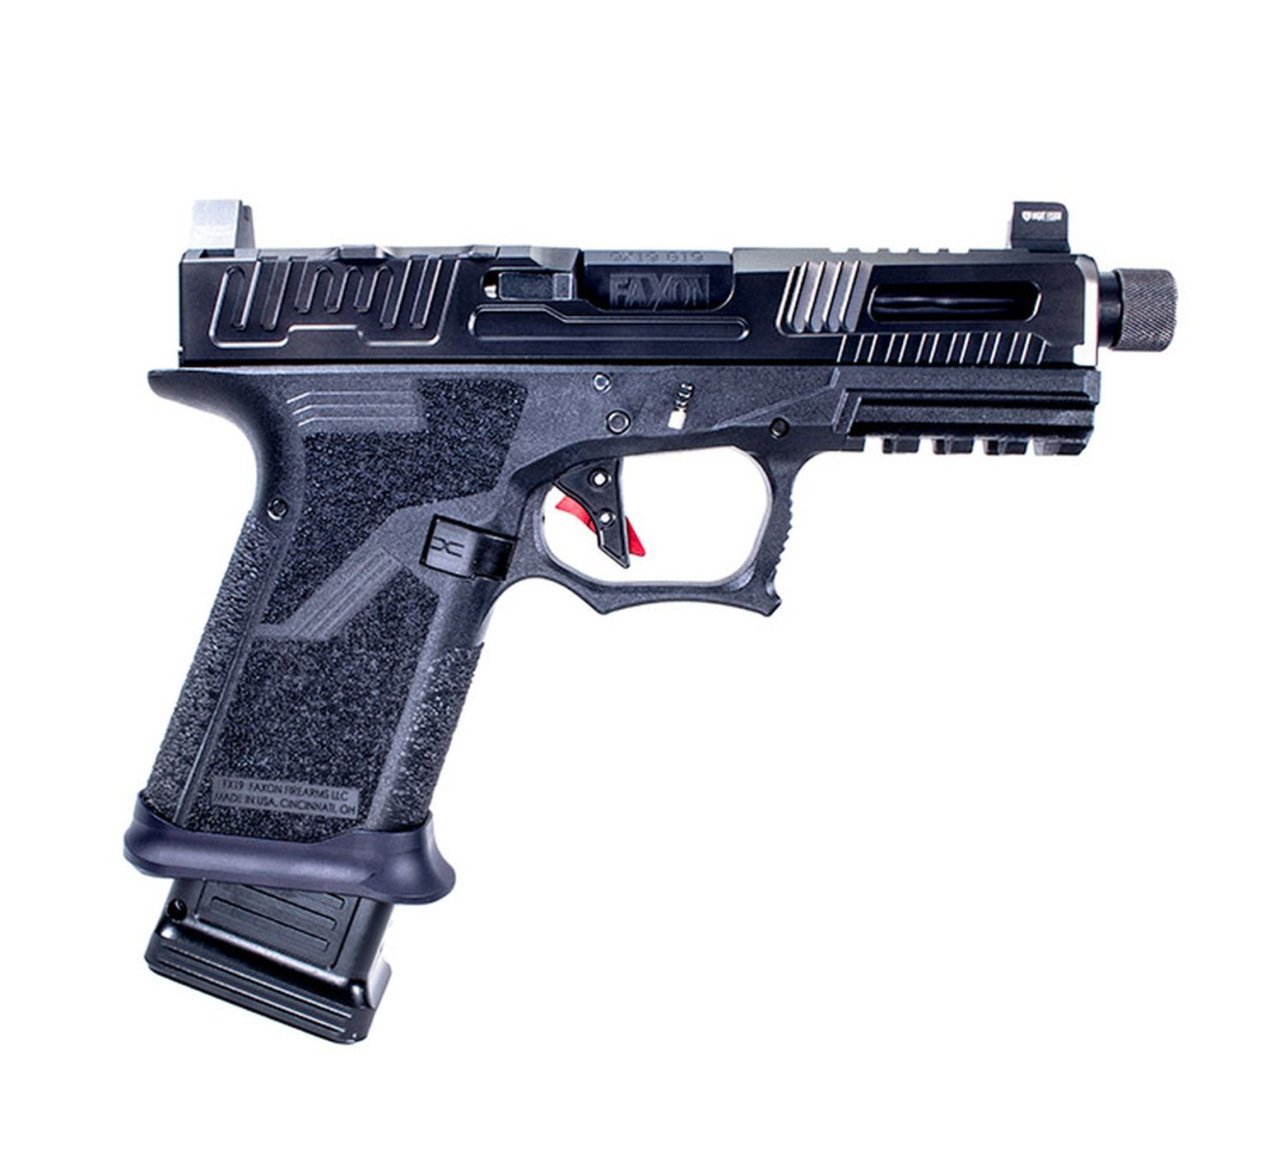 Why The Faxon Fx 19 Pistol Might Dethrone The Mighty Glock